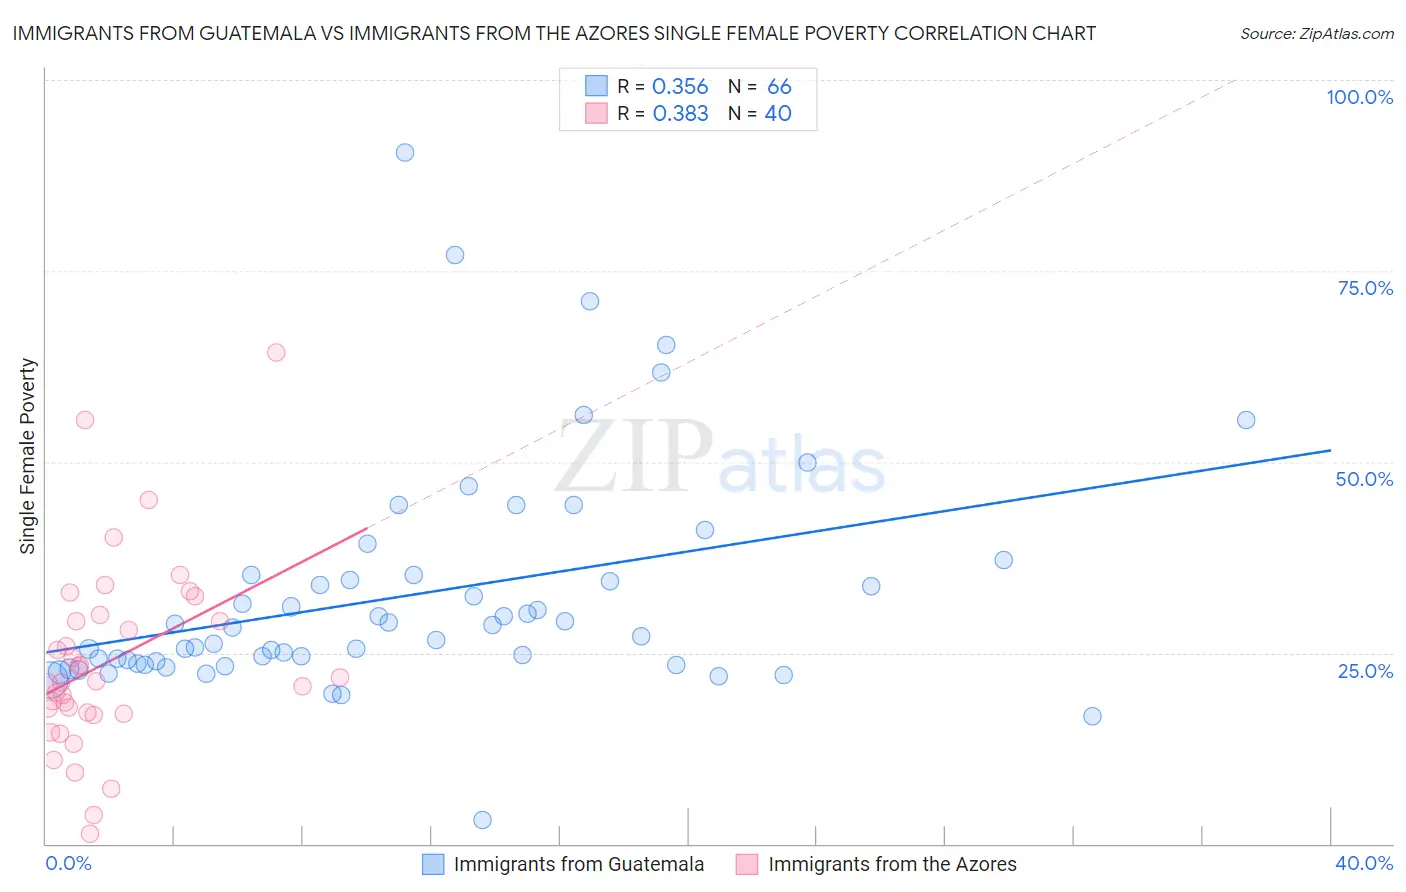 Immigrants from Guatemala vs Immigrants from the Azores Single Female Poverty